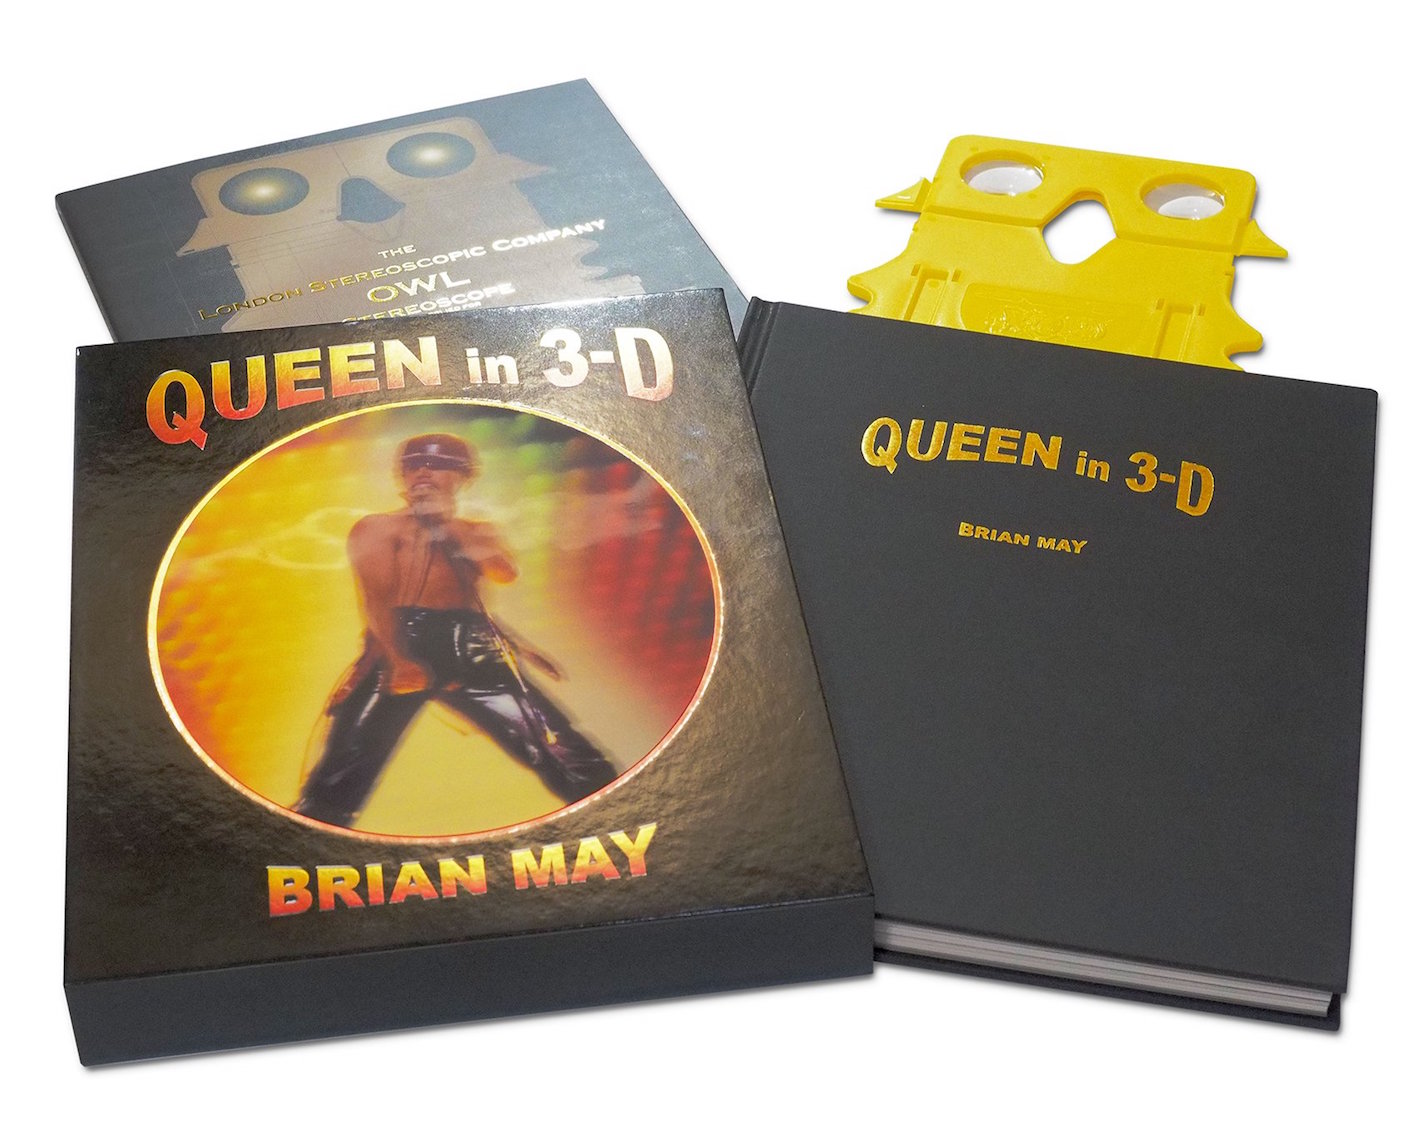 "Queen in 3-D by Brian May (London: London Stereoscopic Company, 2017)."